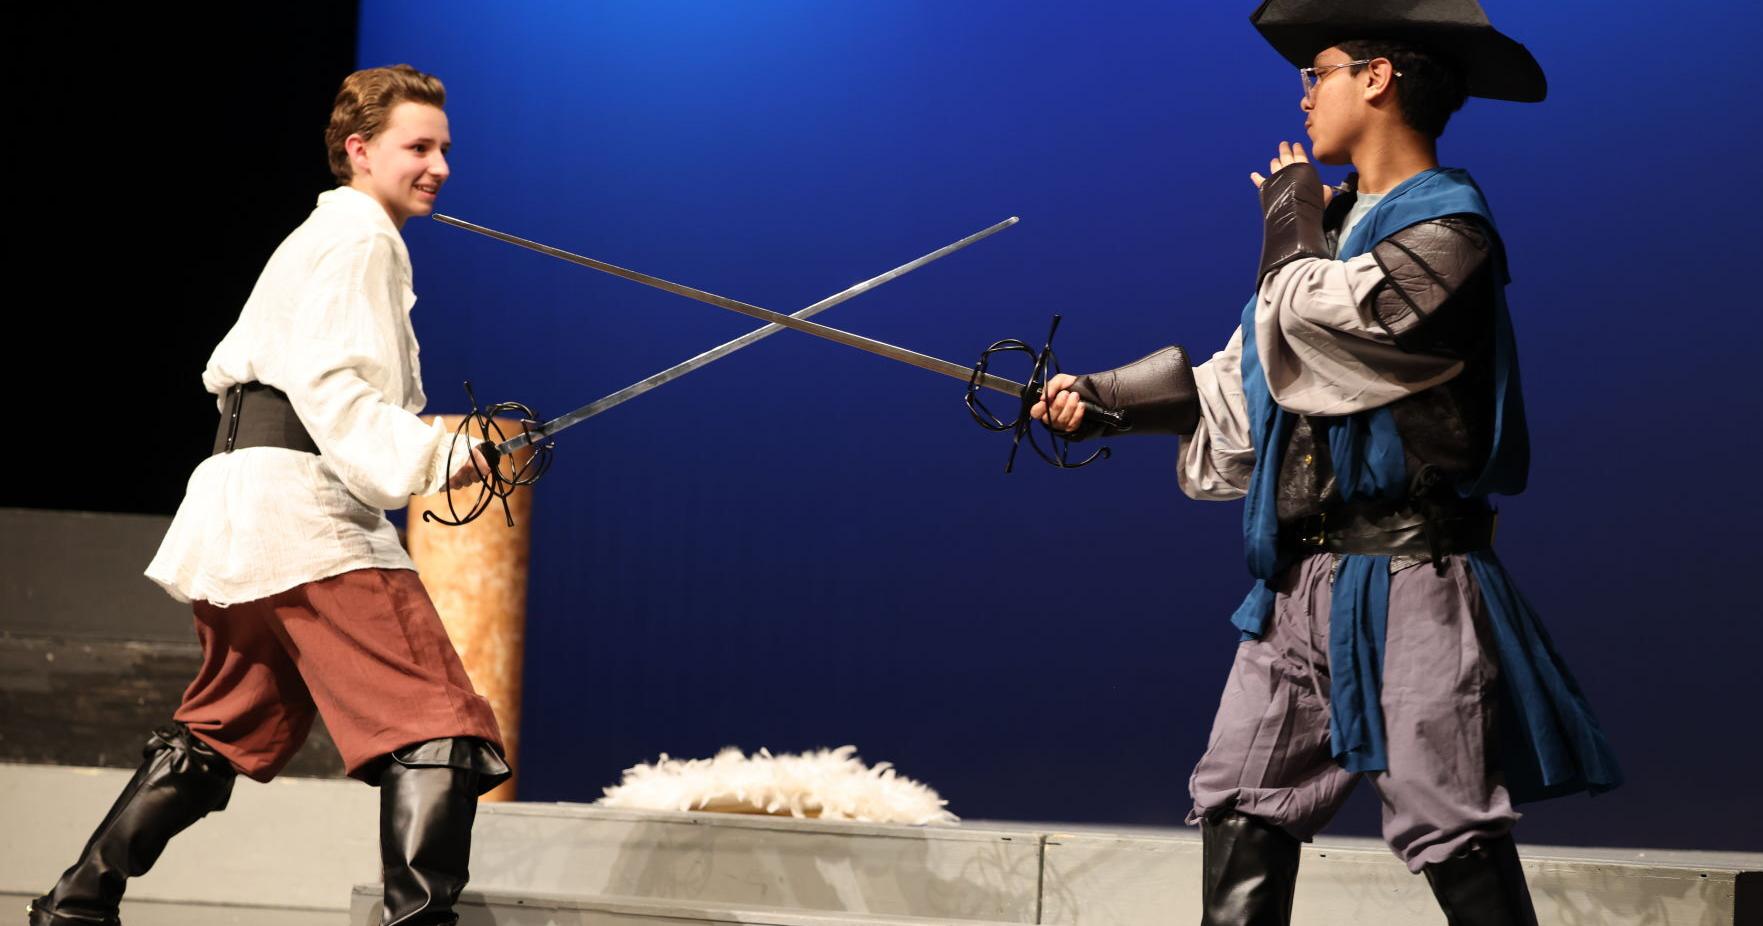 A SWORDED TALE: B'port production of '3 Musketeers' features elaborate choreography